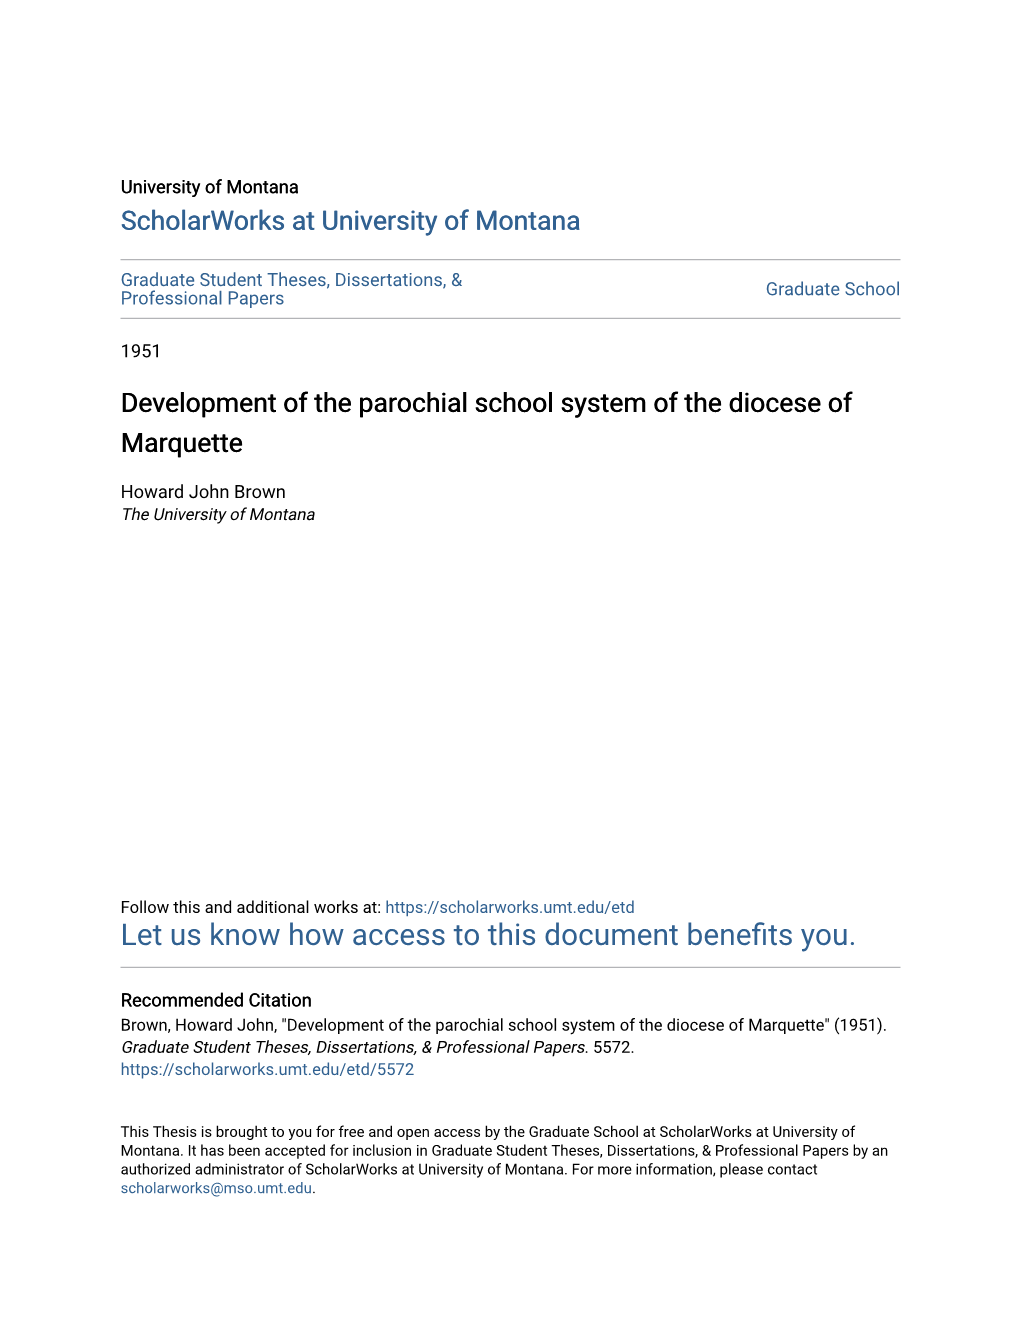 Development of the Parochial School System of the Diocese of Marquette